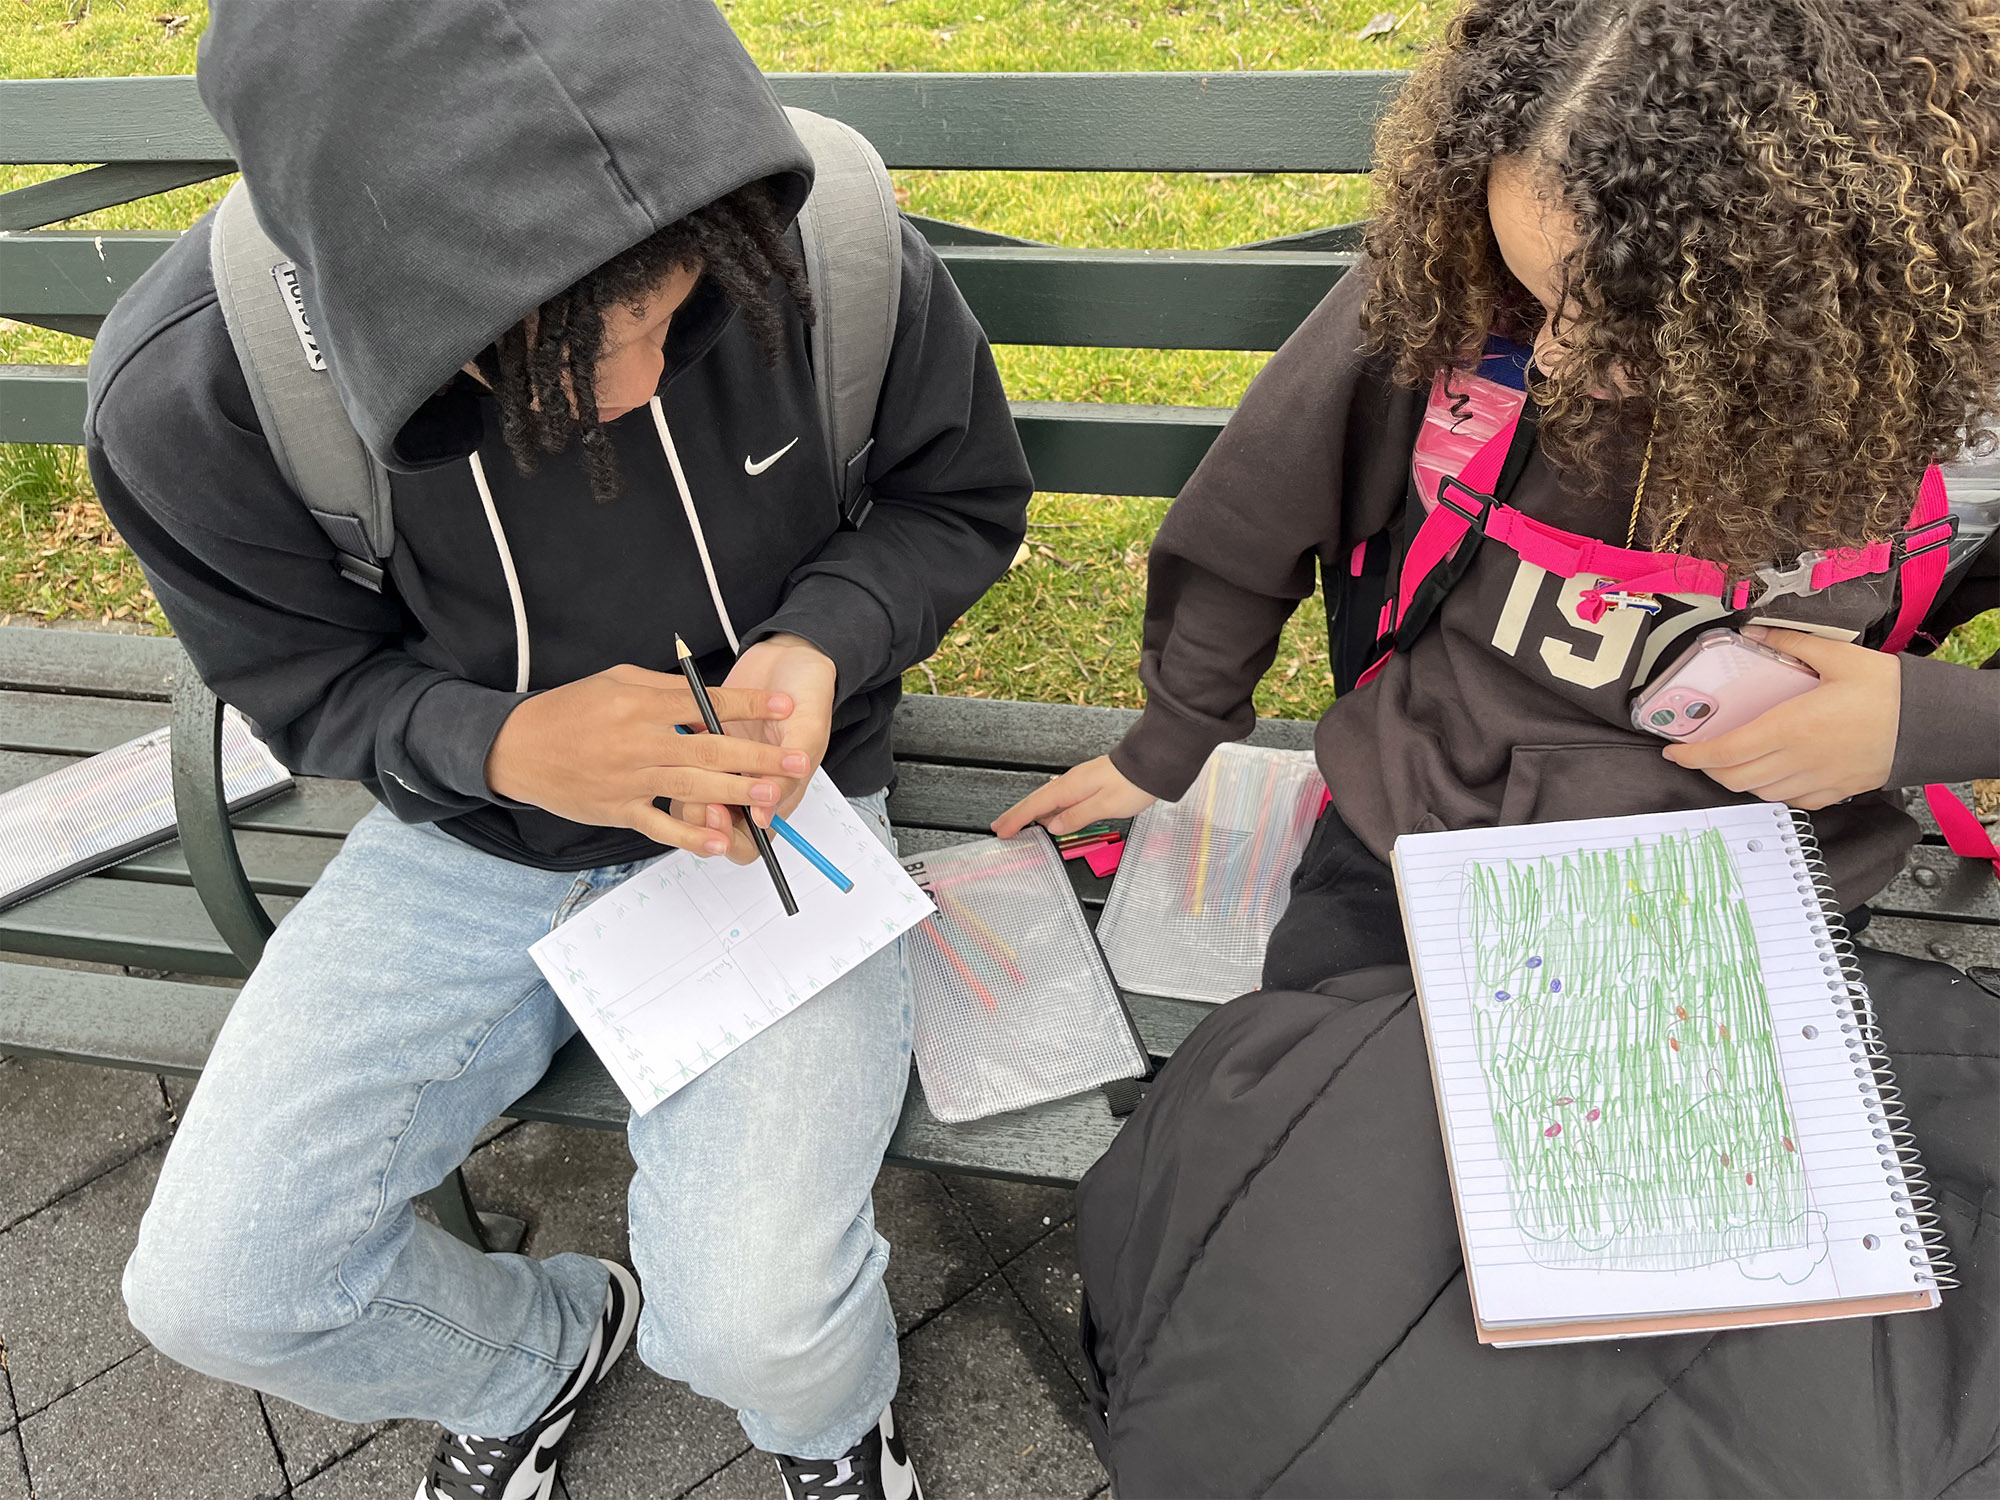 Students sit on a bench outdoors, working together on a map